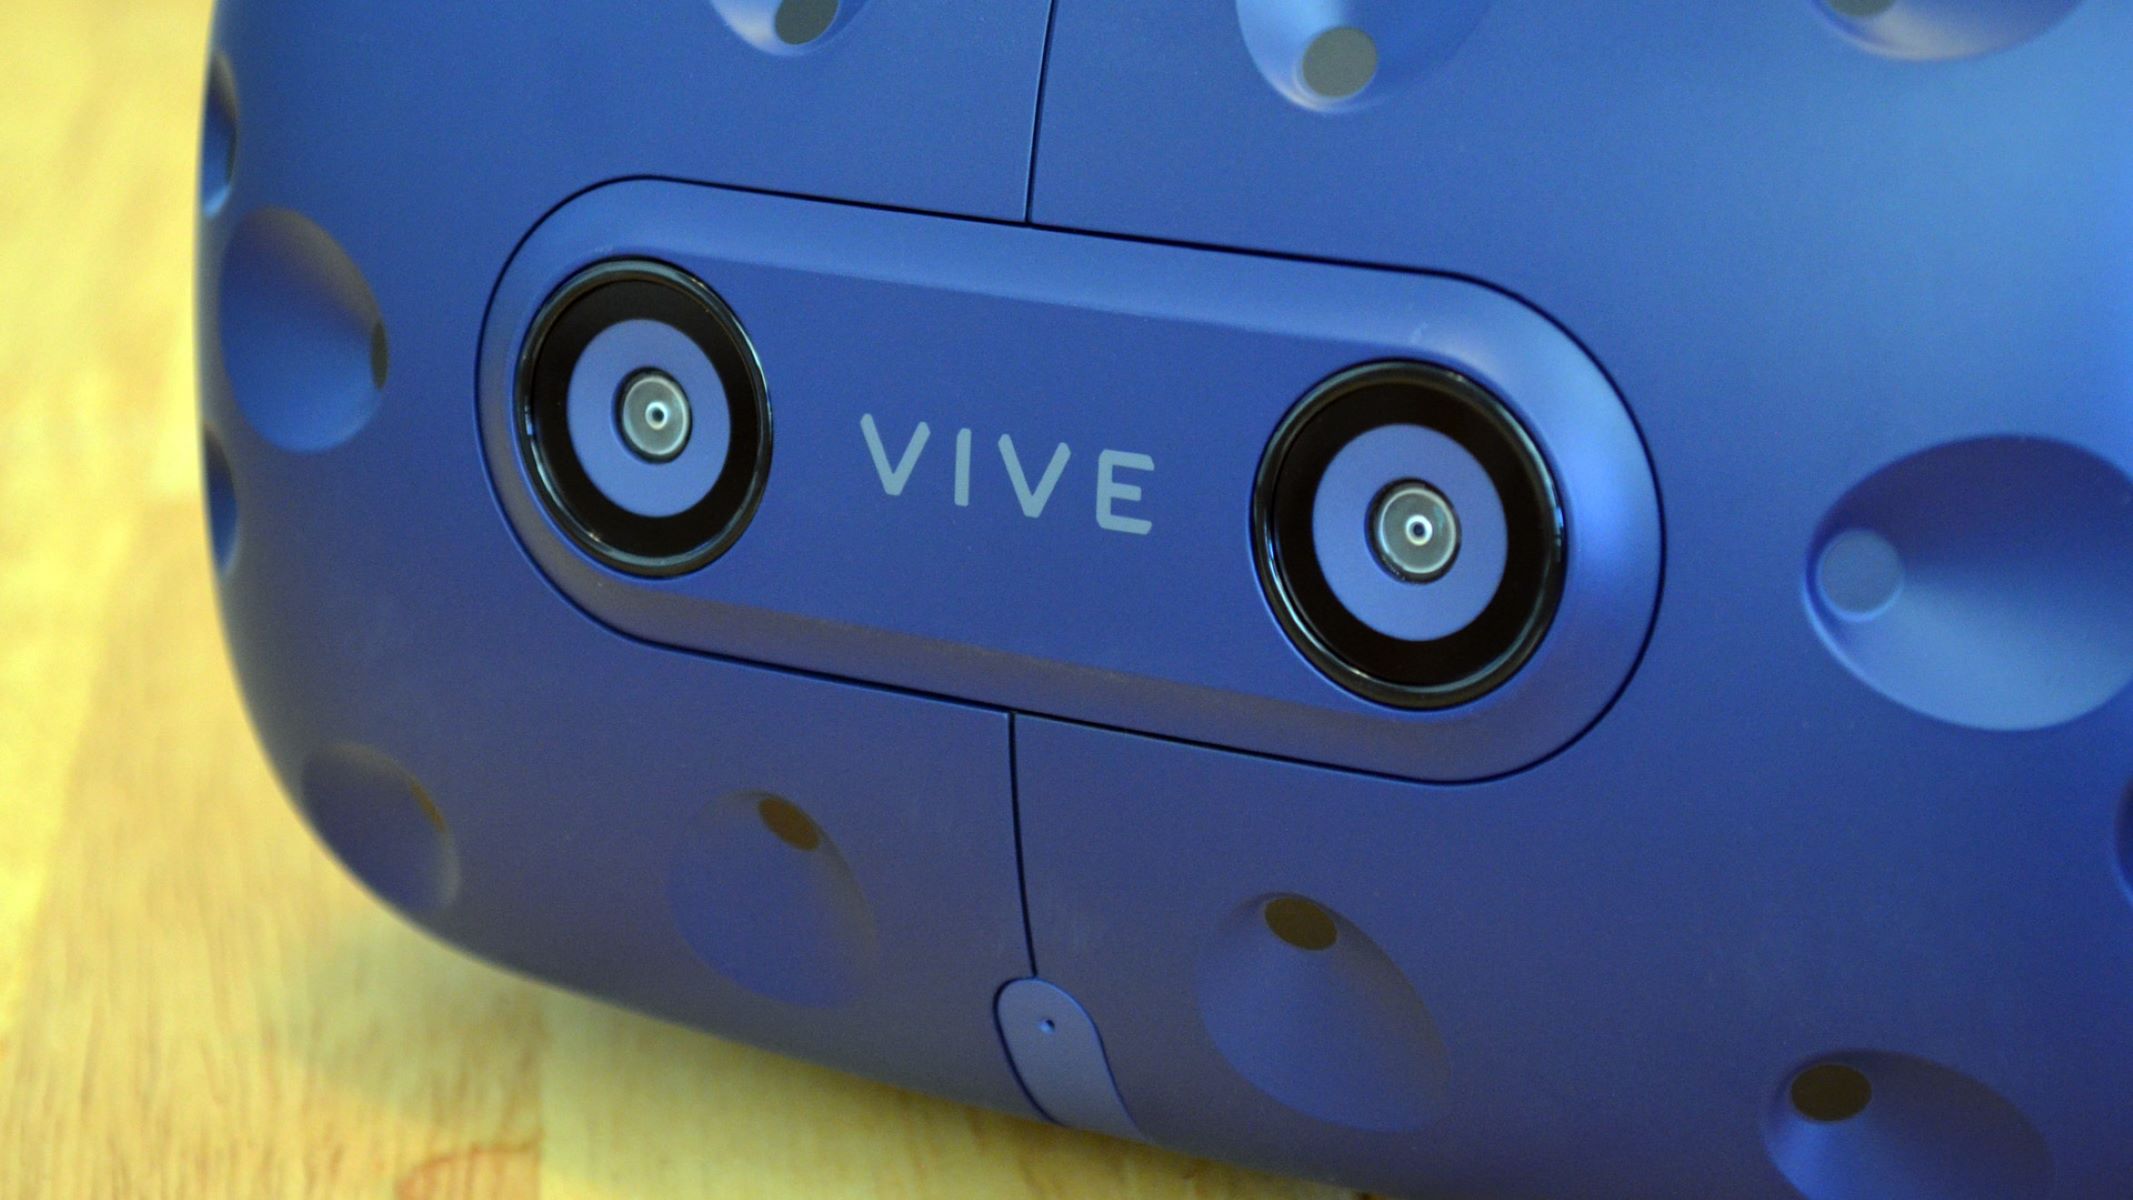 Why Is The HTC Vive Camera Blue?